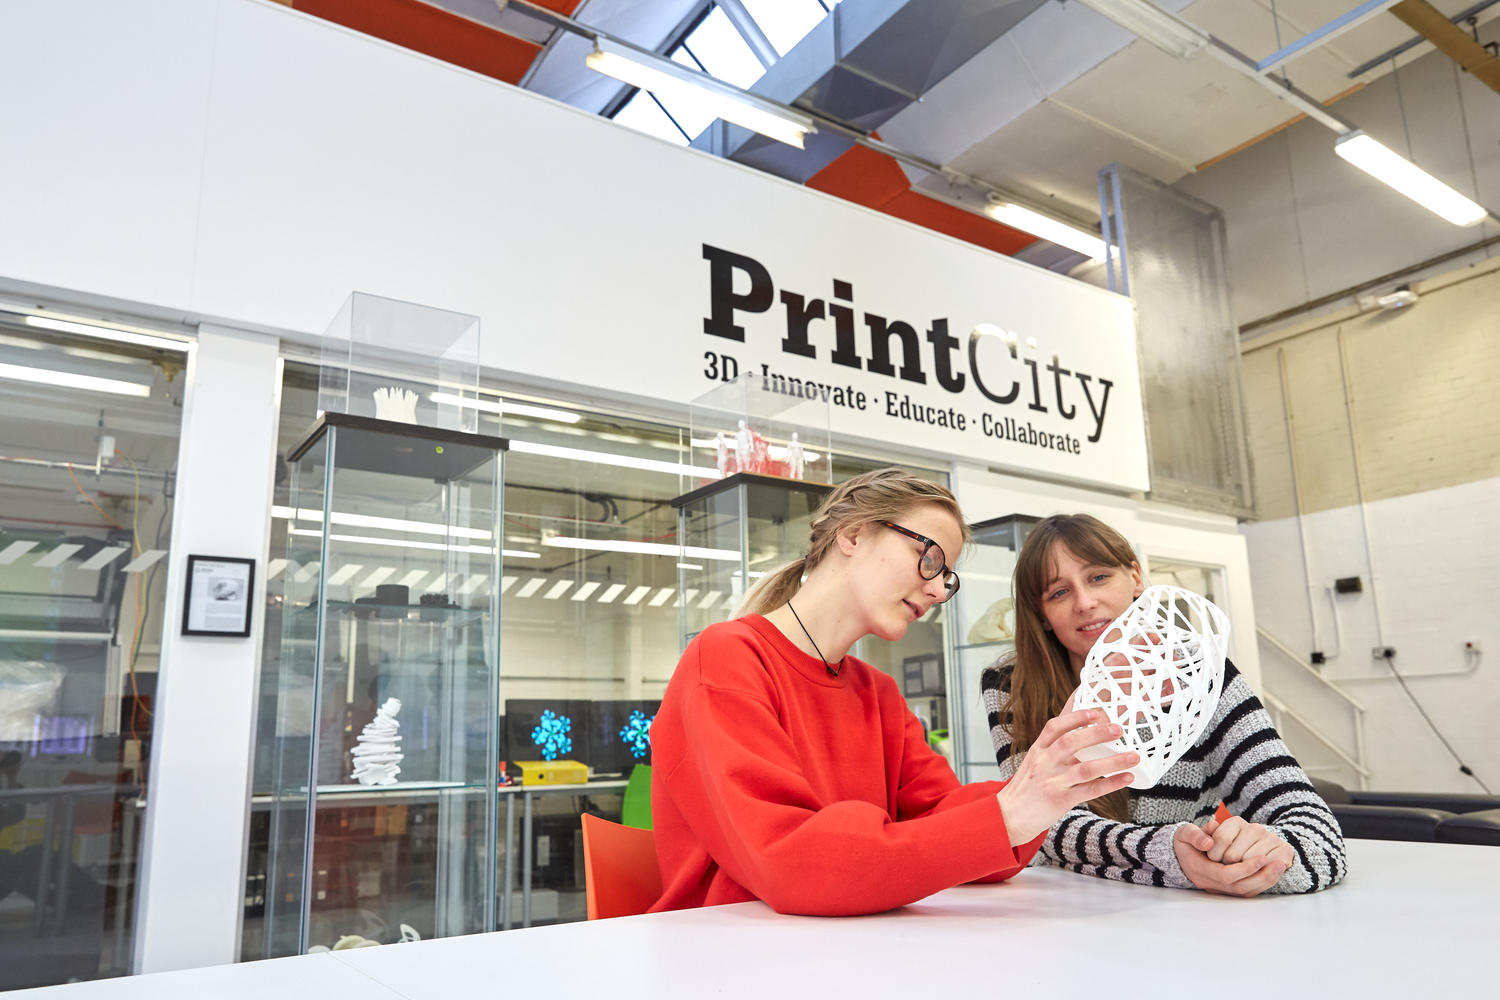 The University launched a brand new advanced 3D printing hub – PrintCity